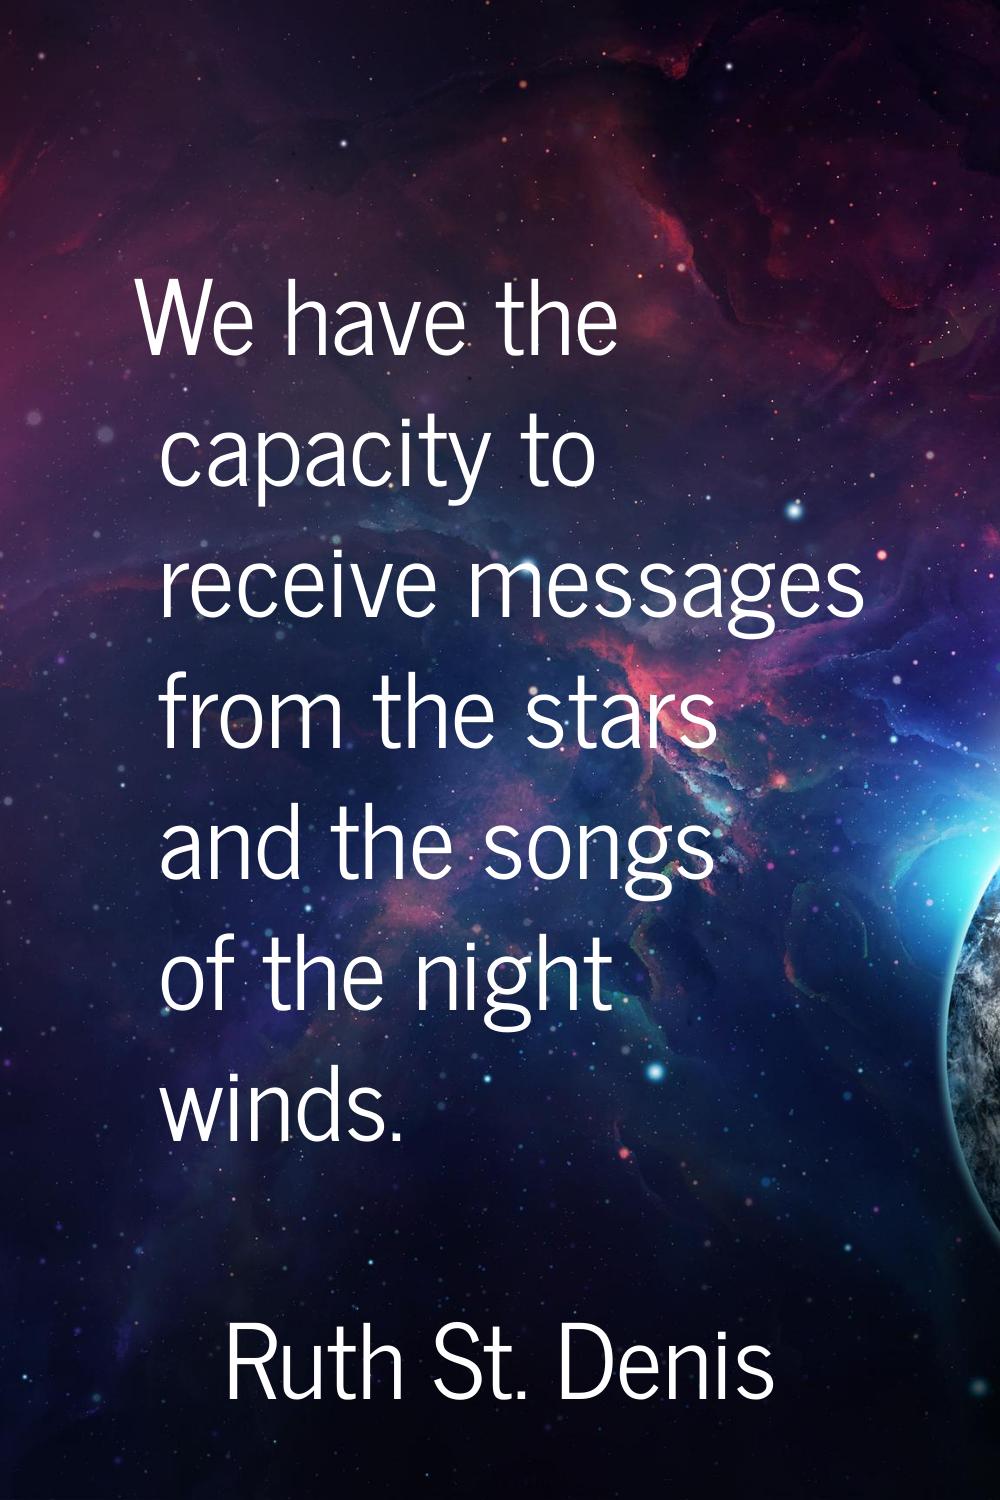 We have the capacity to receive messages from the stars and the songs of the night winds.